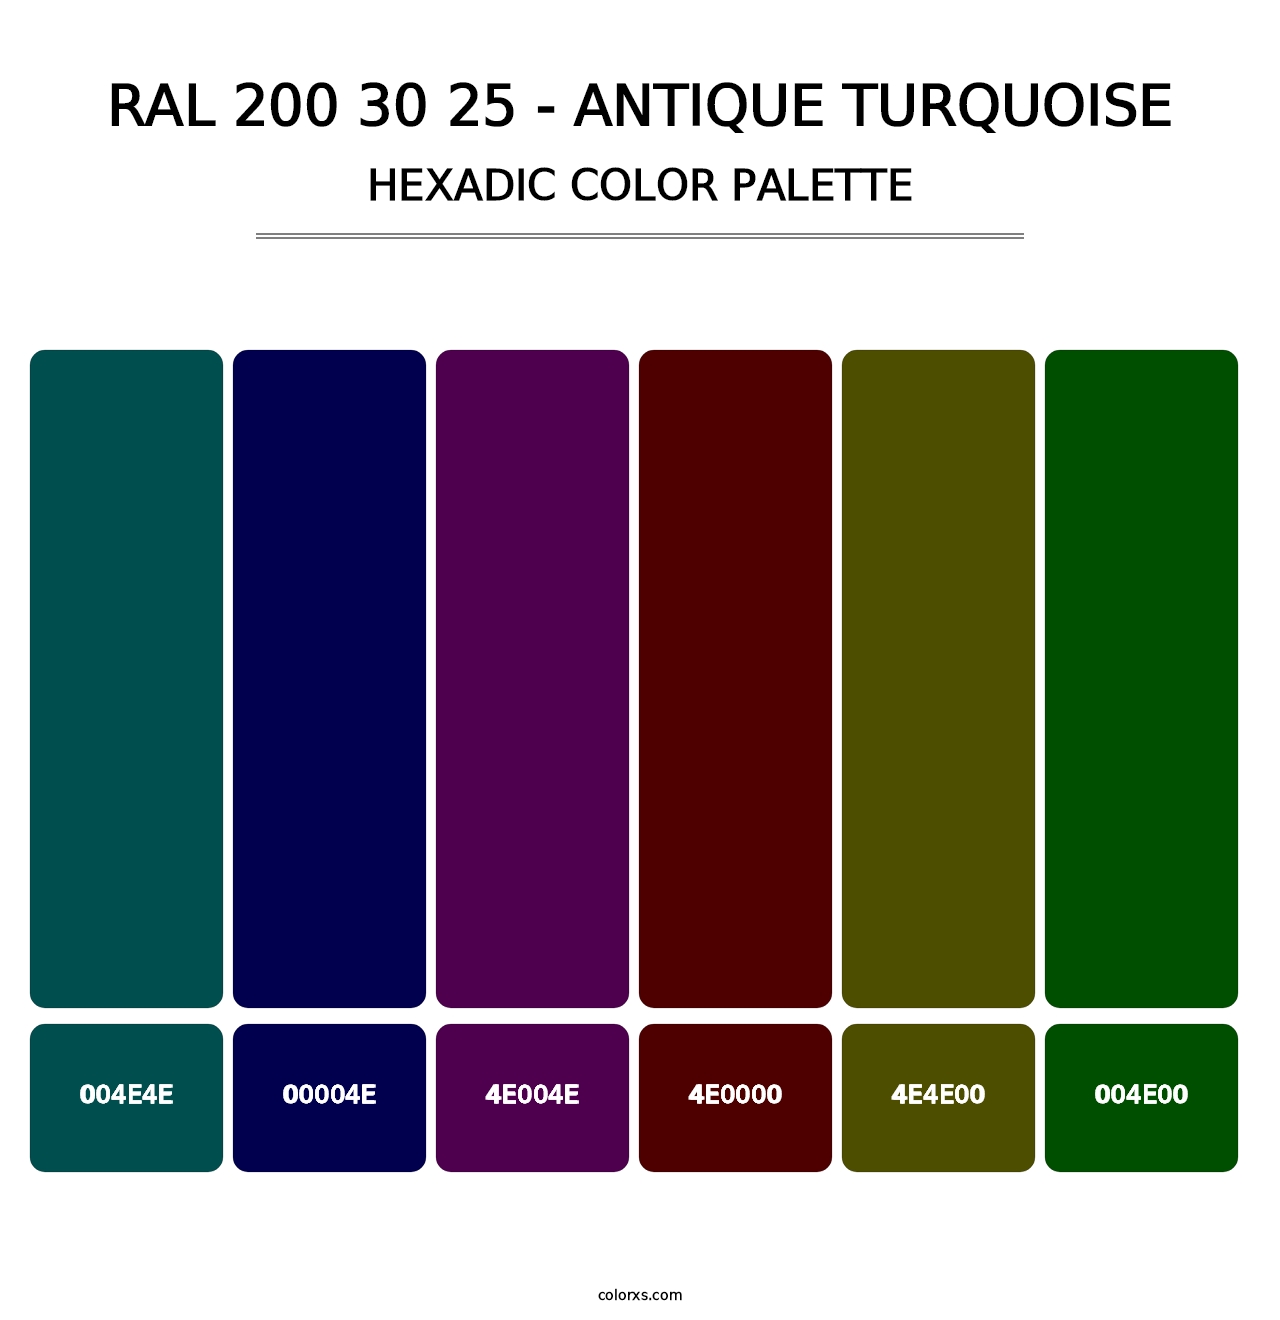 RAL 200 30 25 - Antique Turquoise - Hexadic Color Palette